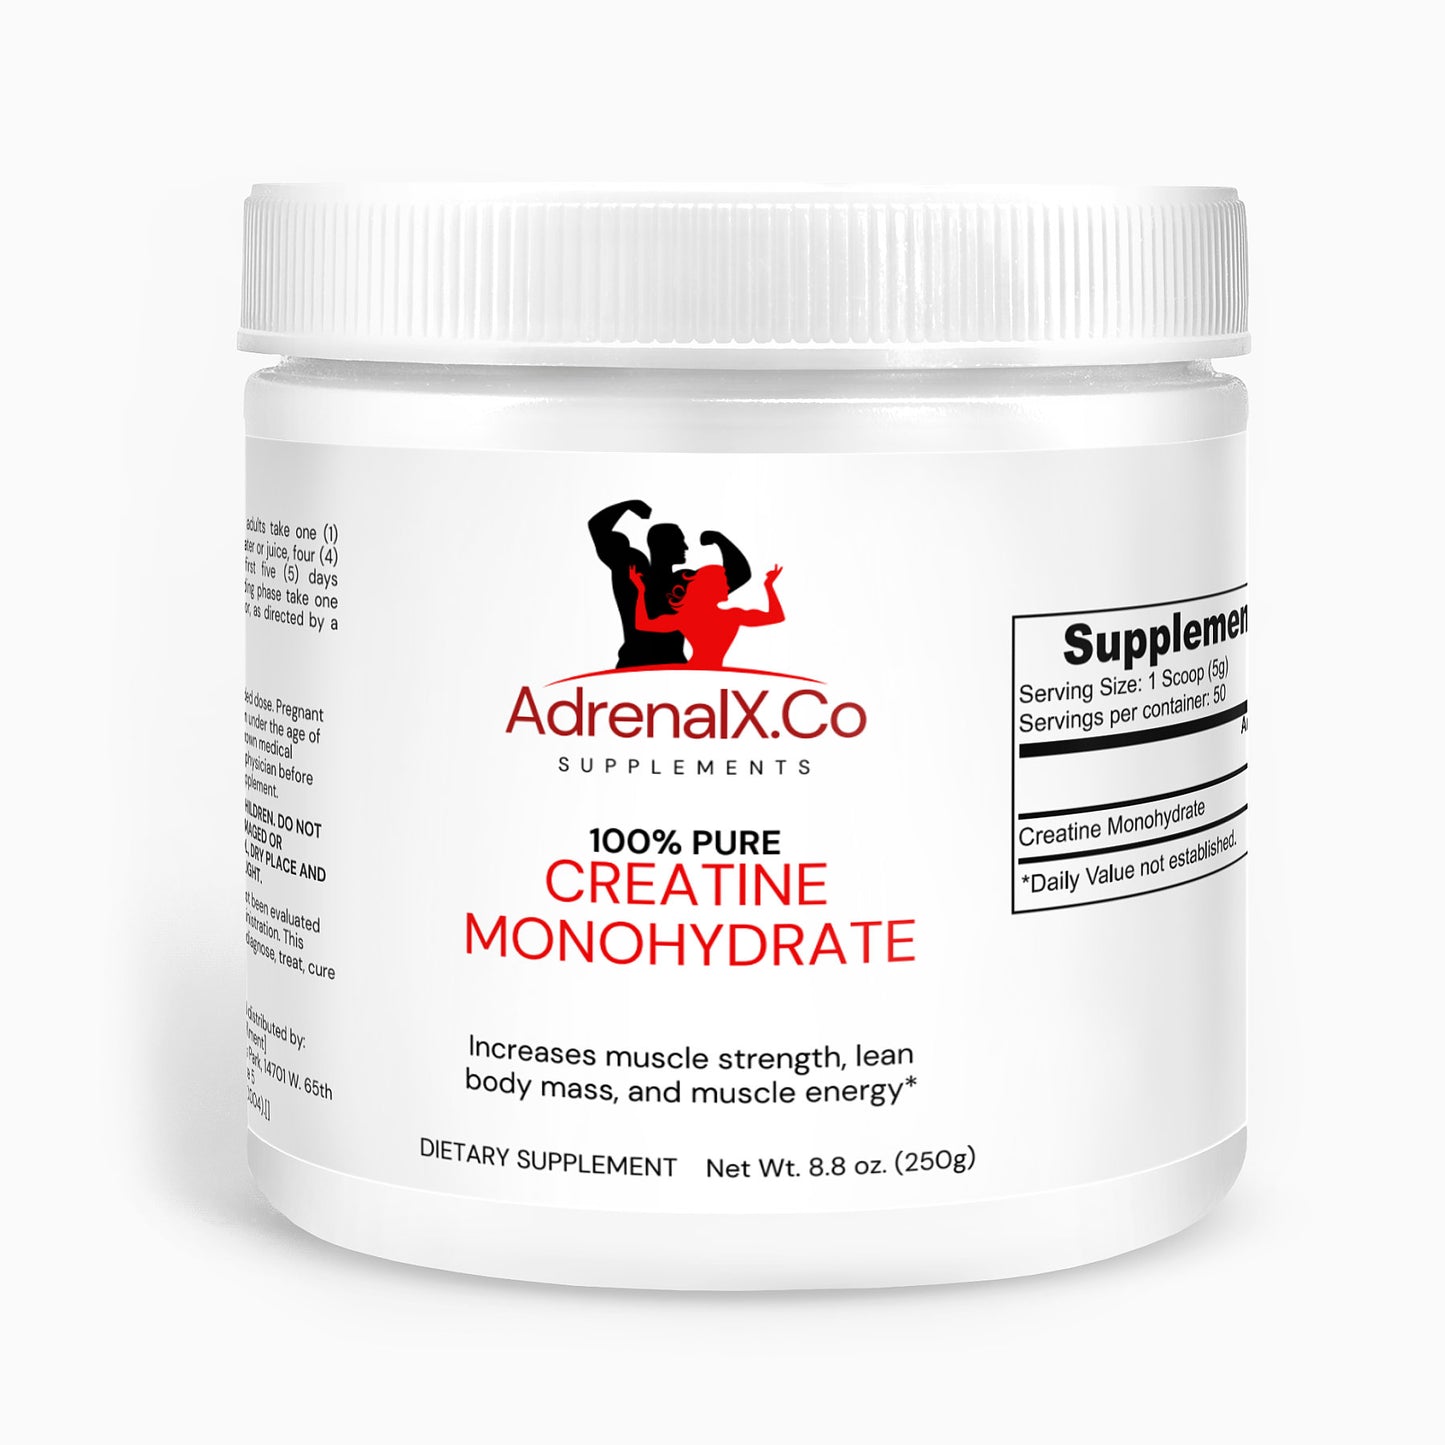 Boost Your Gains: Top-Quality Creatine Supplements For Sell Online. AdrenalX